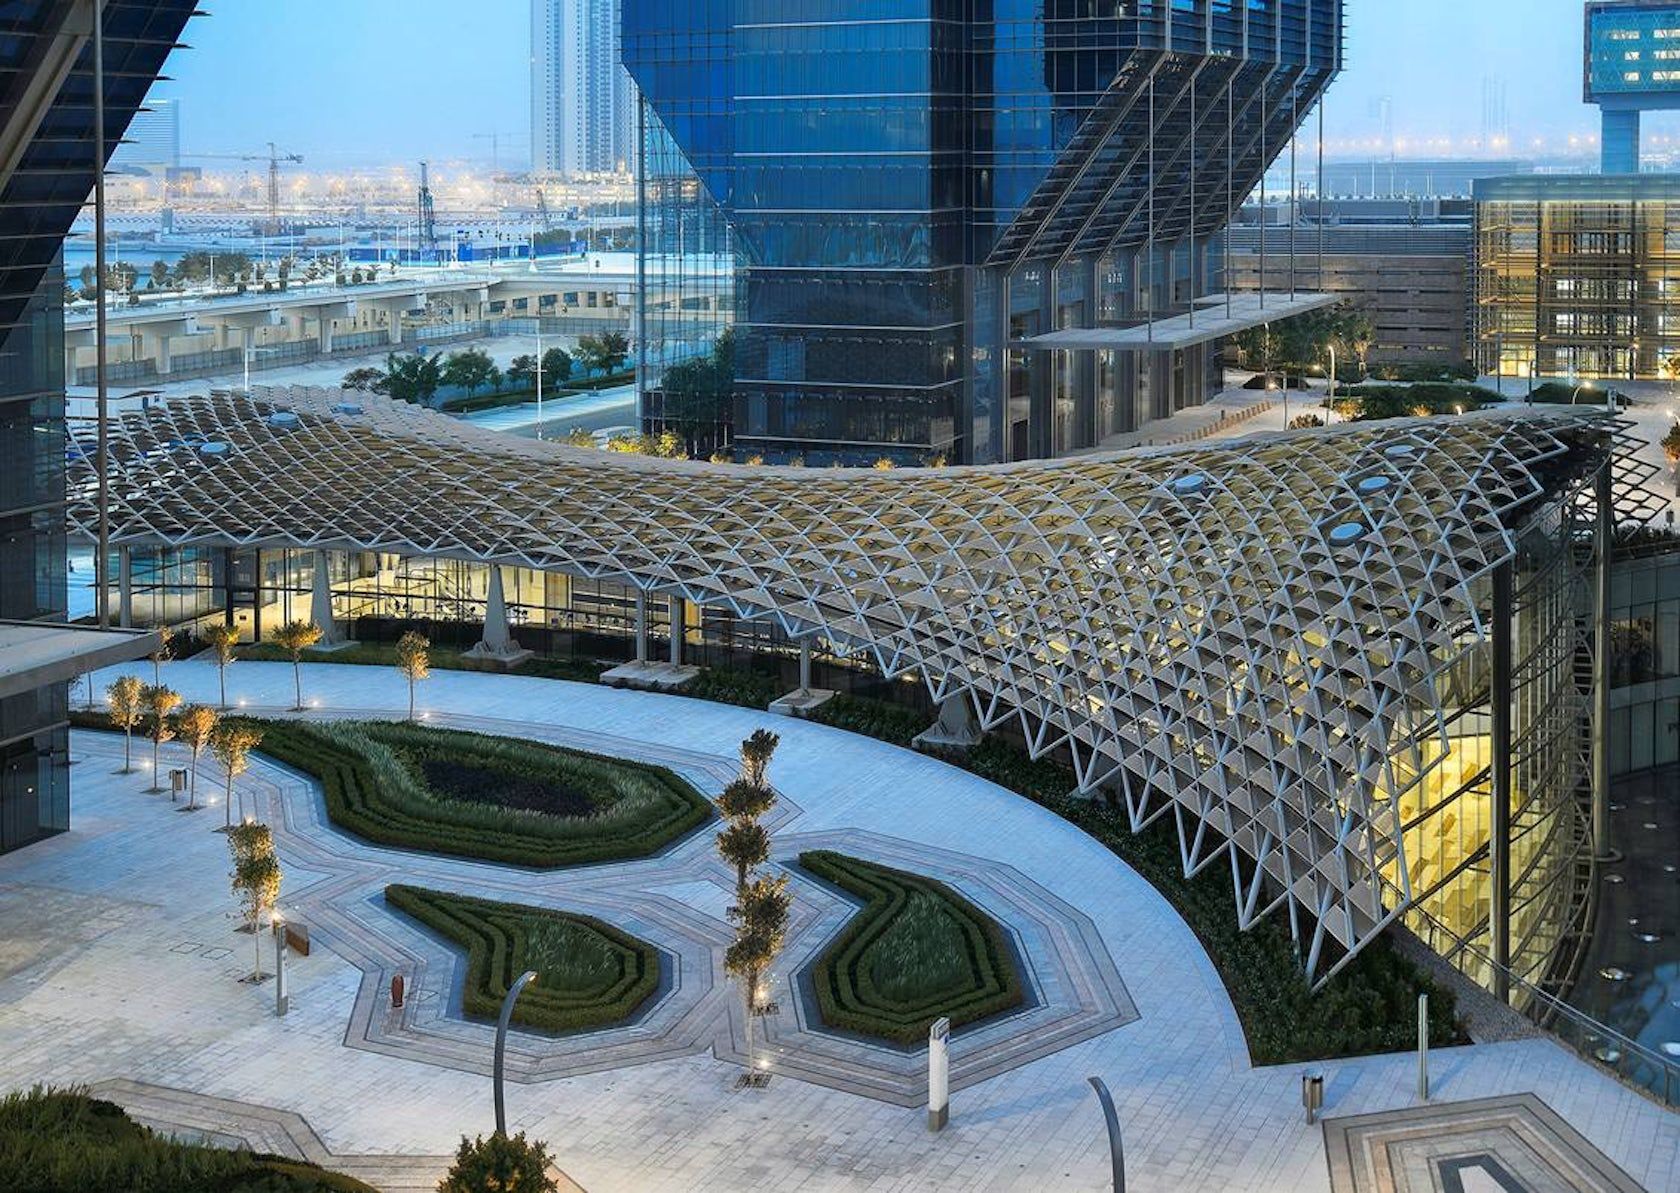 Shopping Malls in Abu Dhabi: Your Guide to the Best Malls.